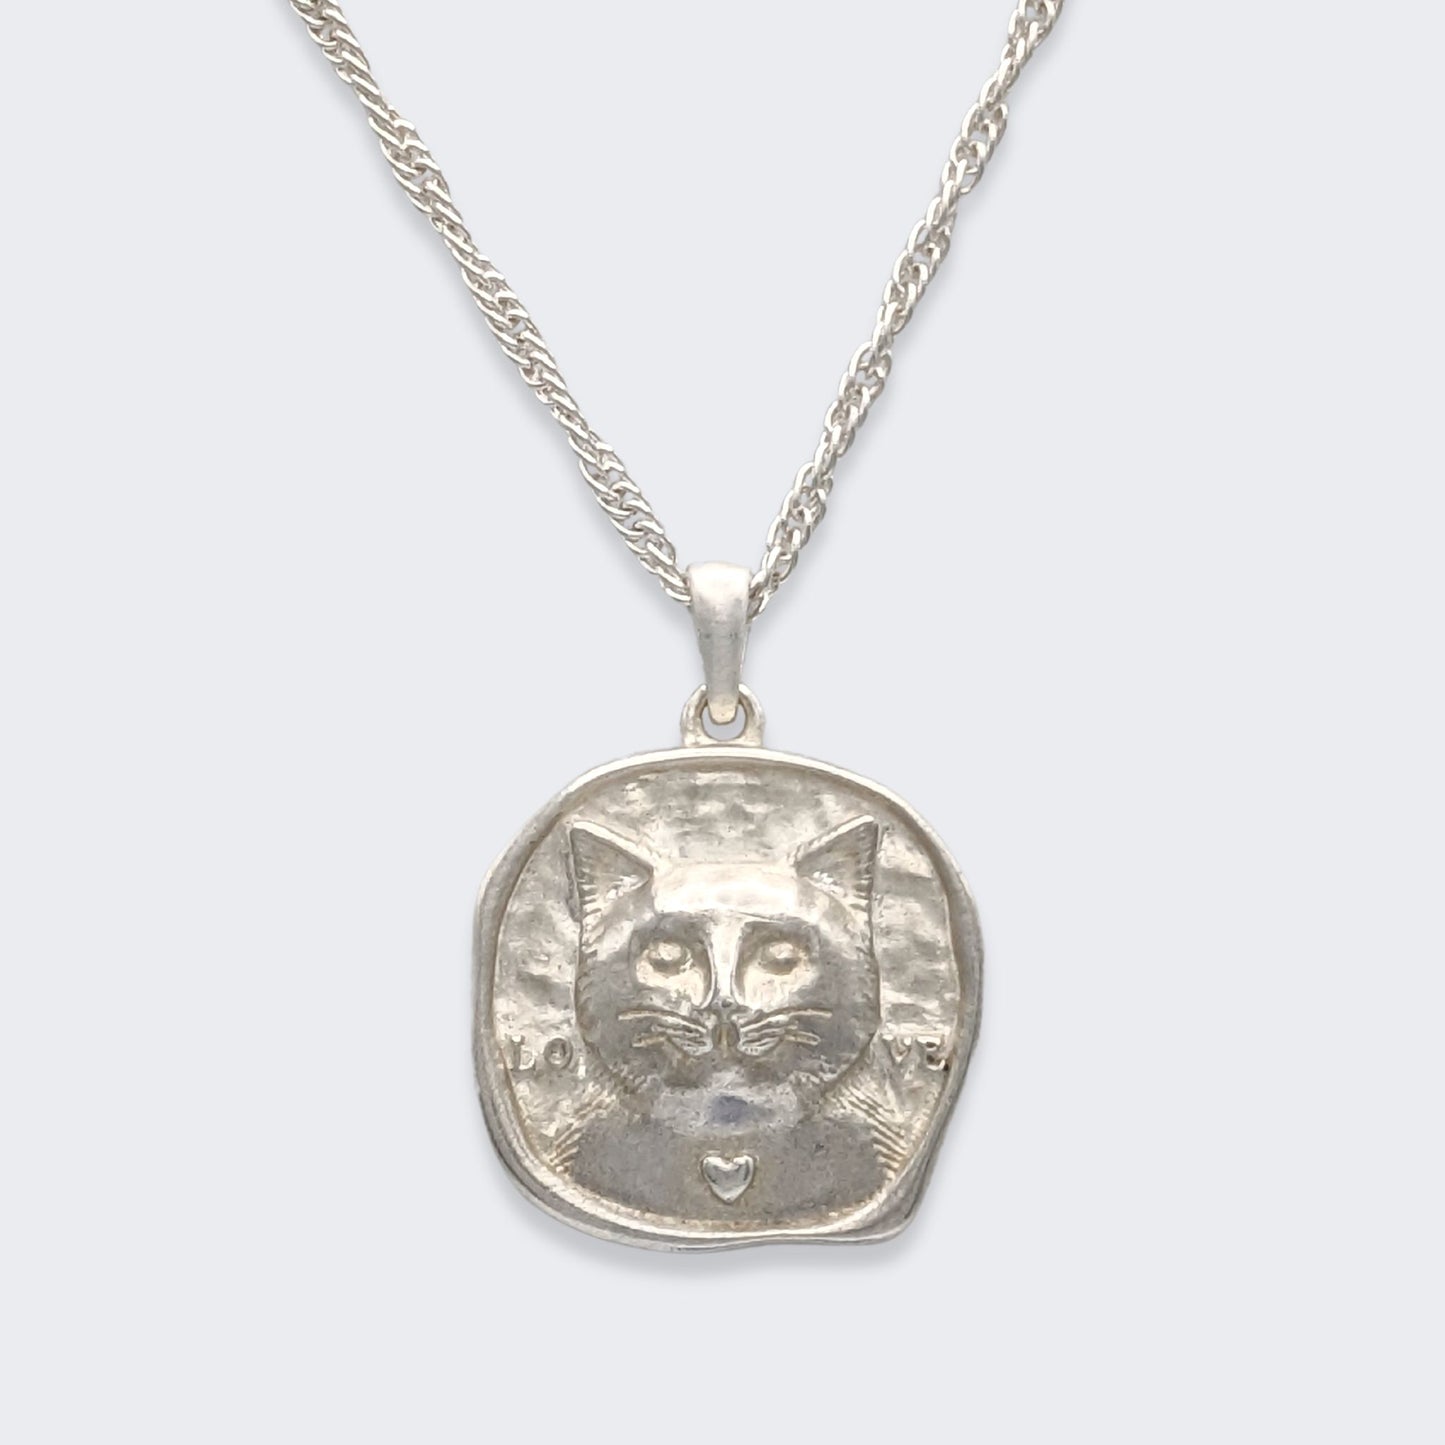 lars reversible cat coin necklace in sterling silver (front view)